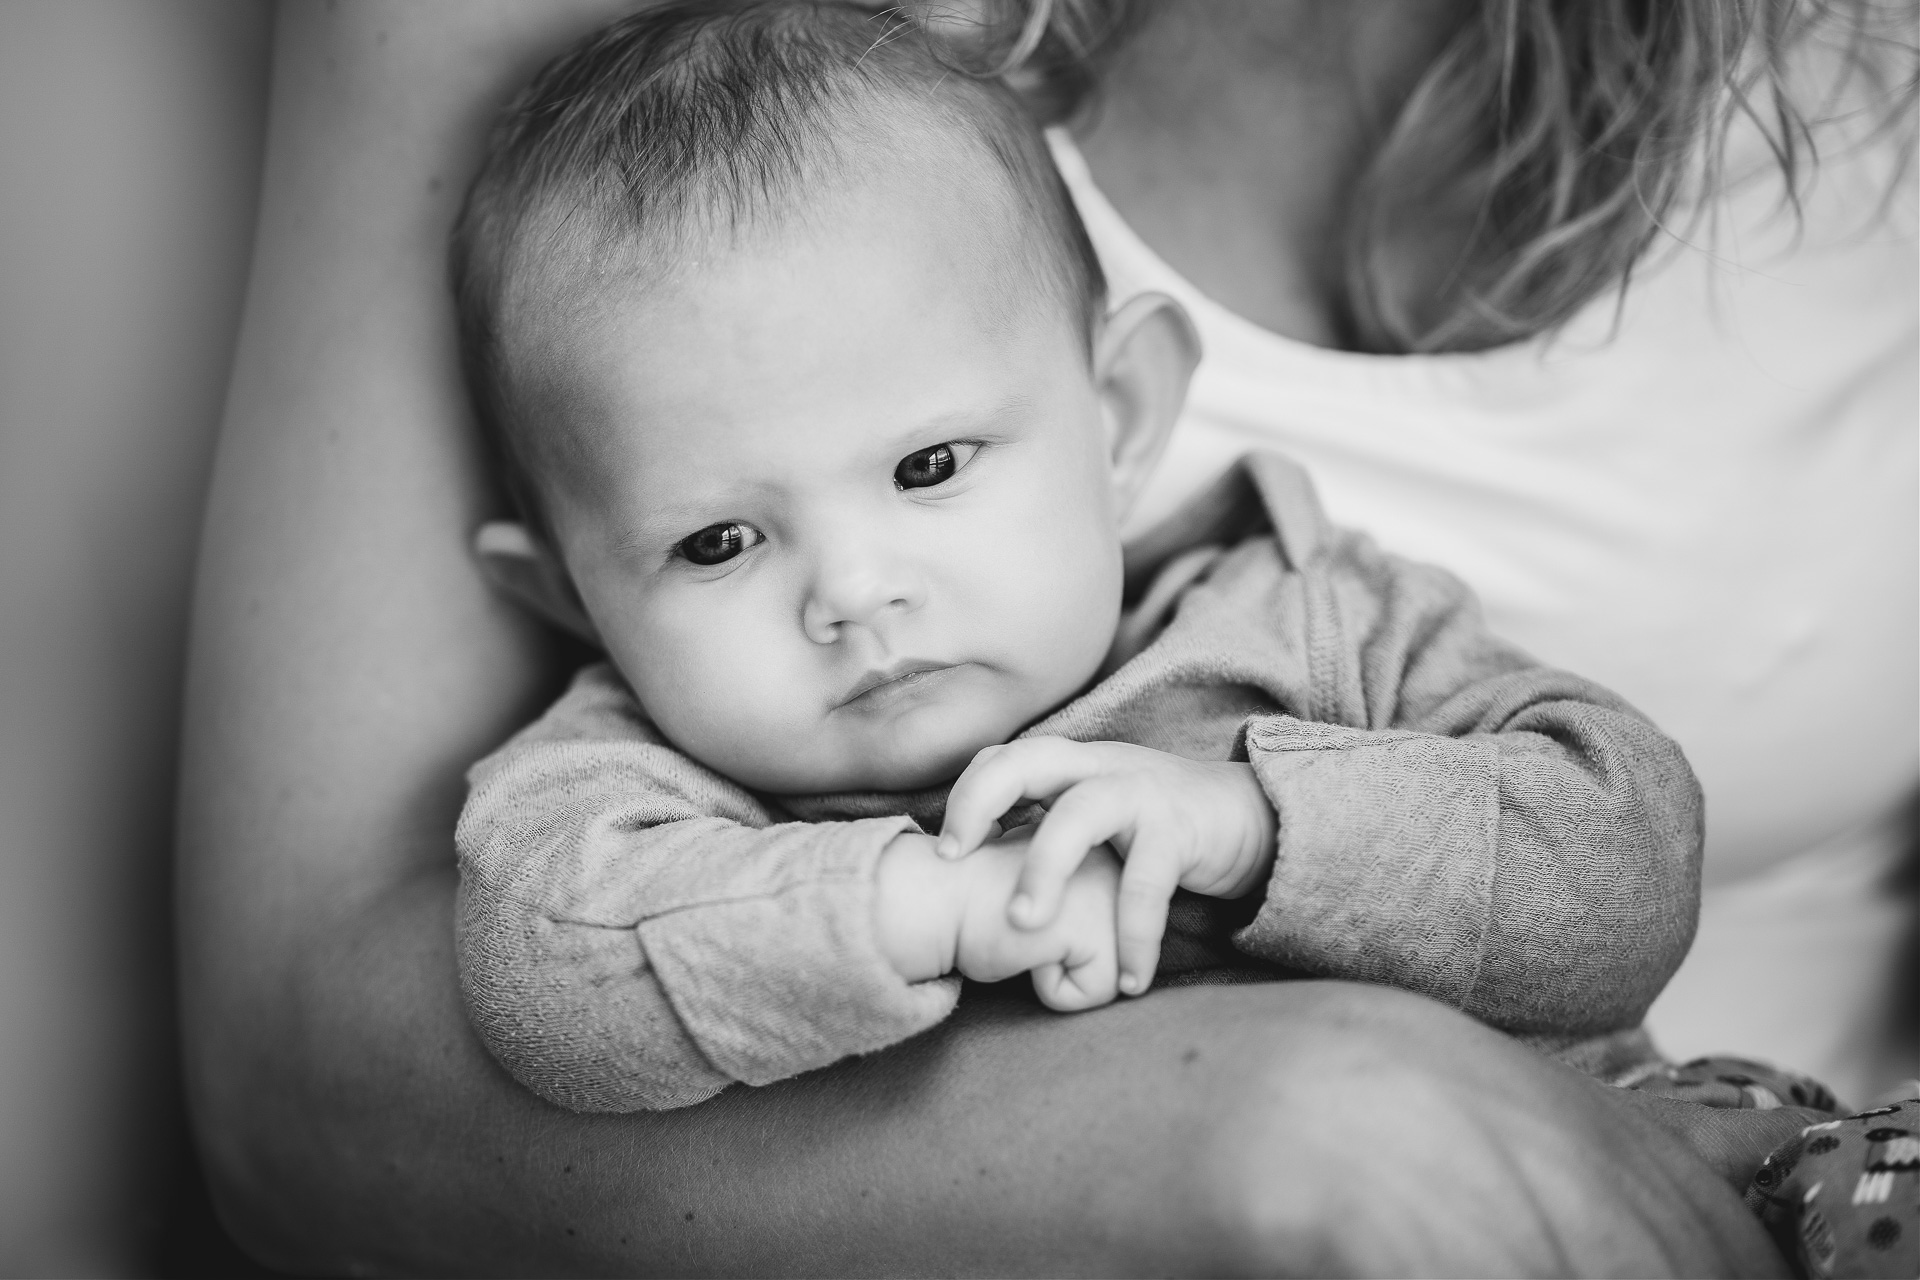 Family photography at home, a baby in her mother's arms